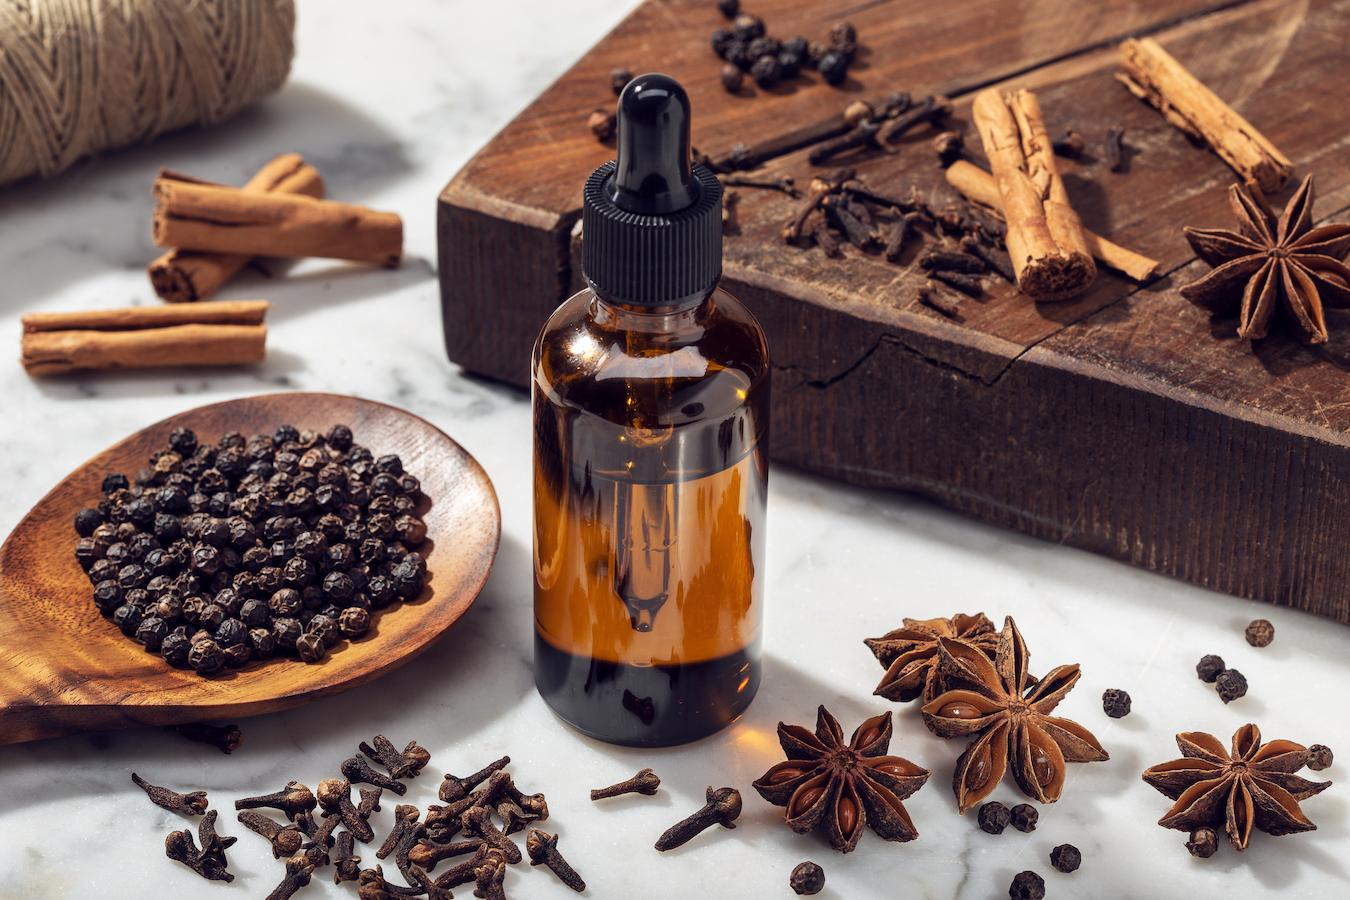 Add clove oil treating acne amazing benefits oral yeast infections skin rashes cotton ball clove powder adding clove oil clove buds antiseptic properties dark circles dark circles acne marks immune system body lotions clove benefits clove benefits skin advantages affected region use clove oil skincare routine skincare routine